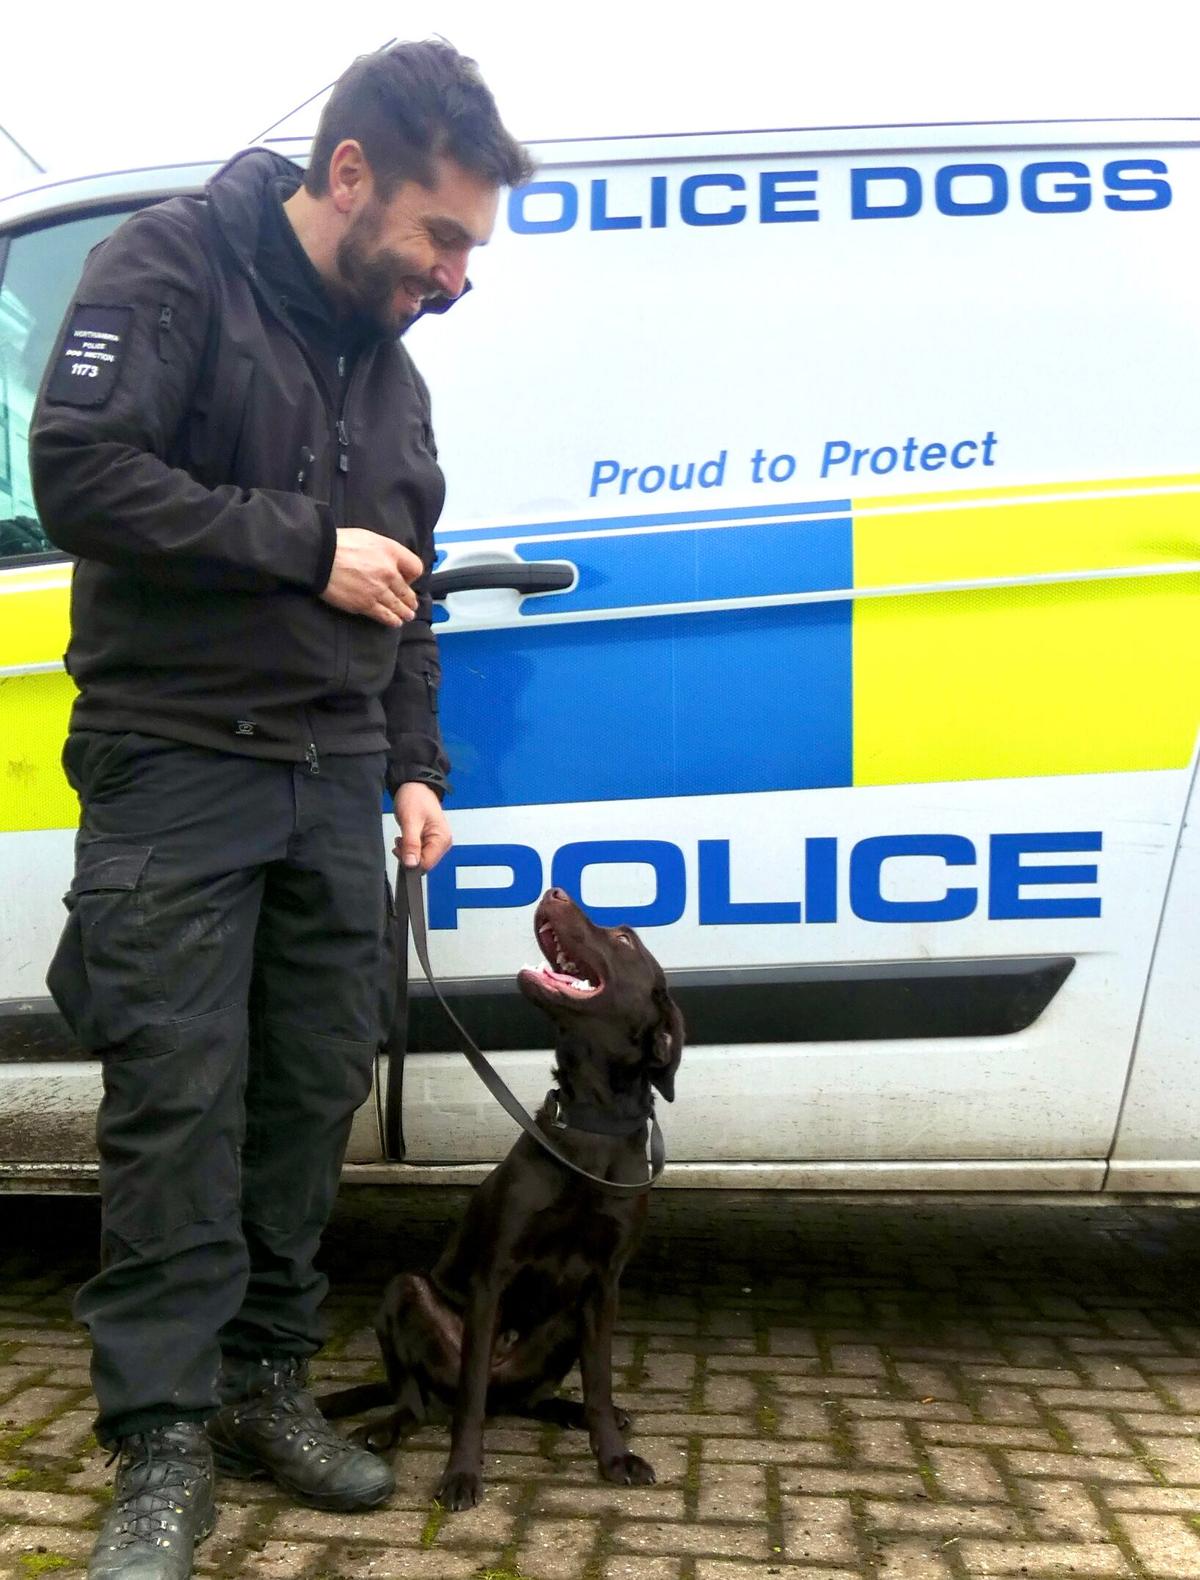 Rolo the puppy with his handler, Police C0nstable Dave Robinson. (Courtesy of <a href="https://beta.northumbria.police.uk/">Northumbria Police</a>)